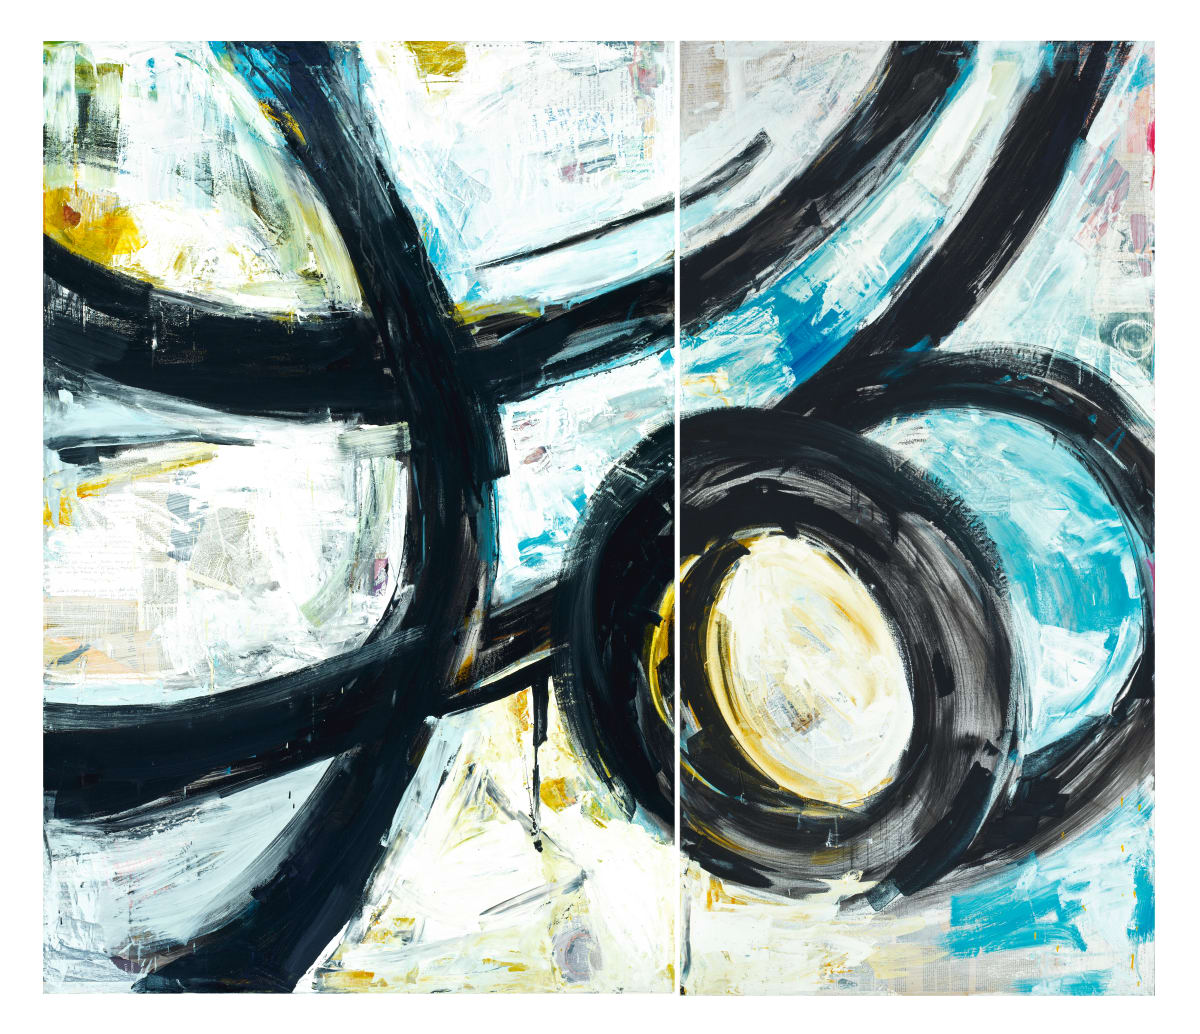 Life Reviewed by D Hake Brinckerhoff  Image: abstract mixed media diptych 